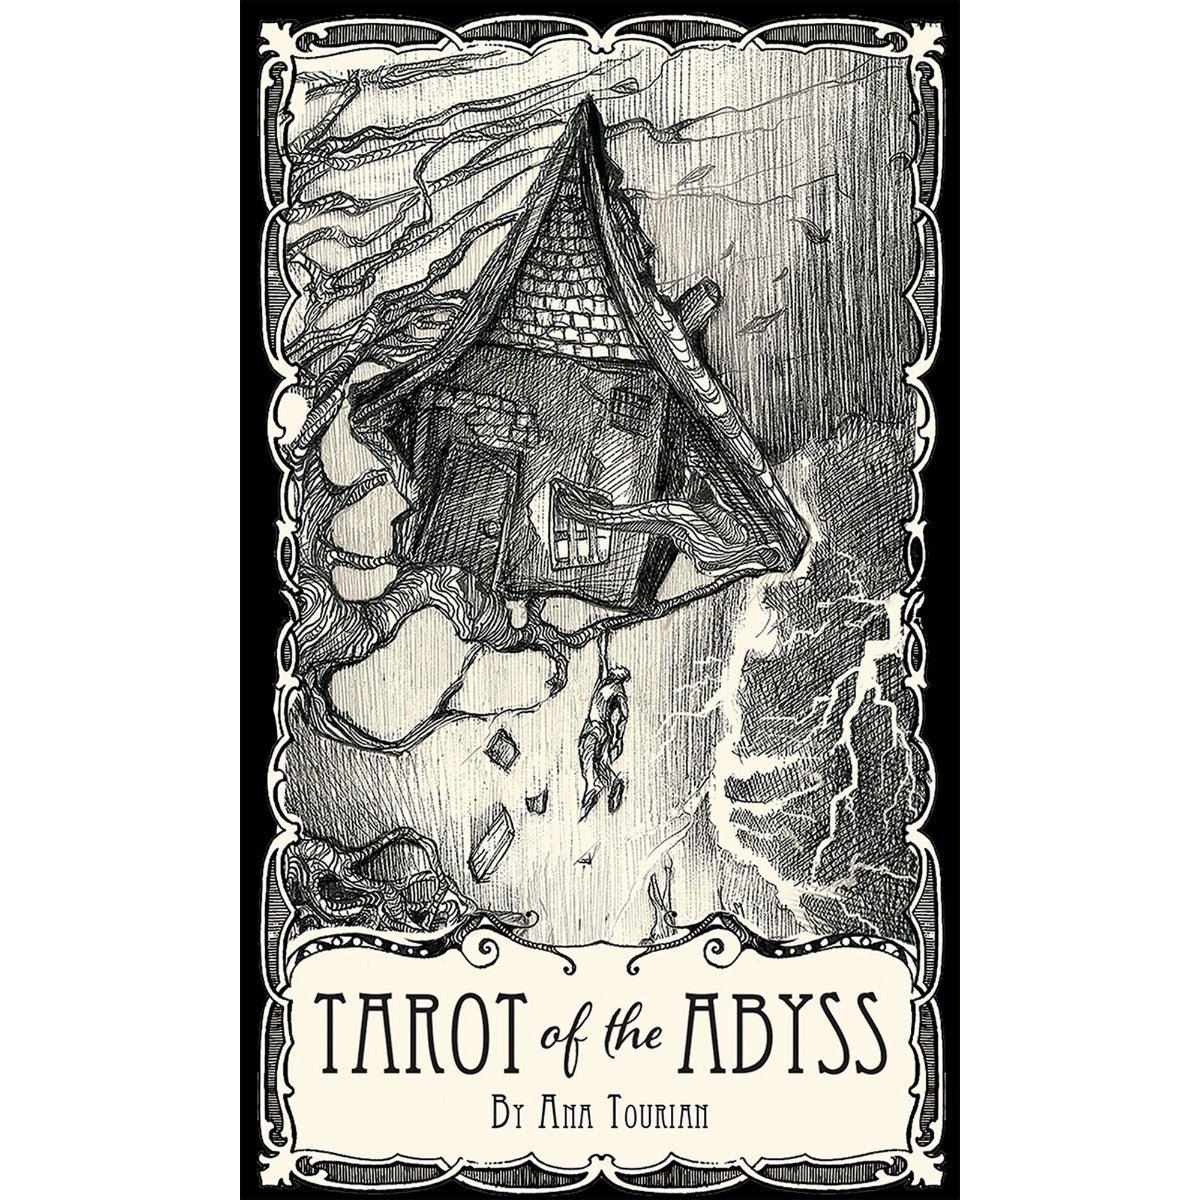 Tarot of the Abyss - 13 Moons